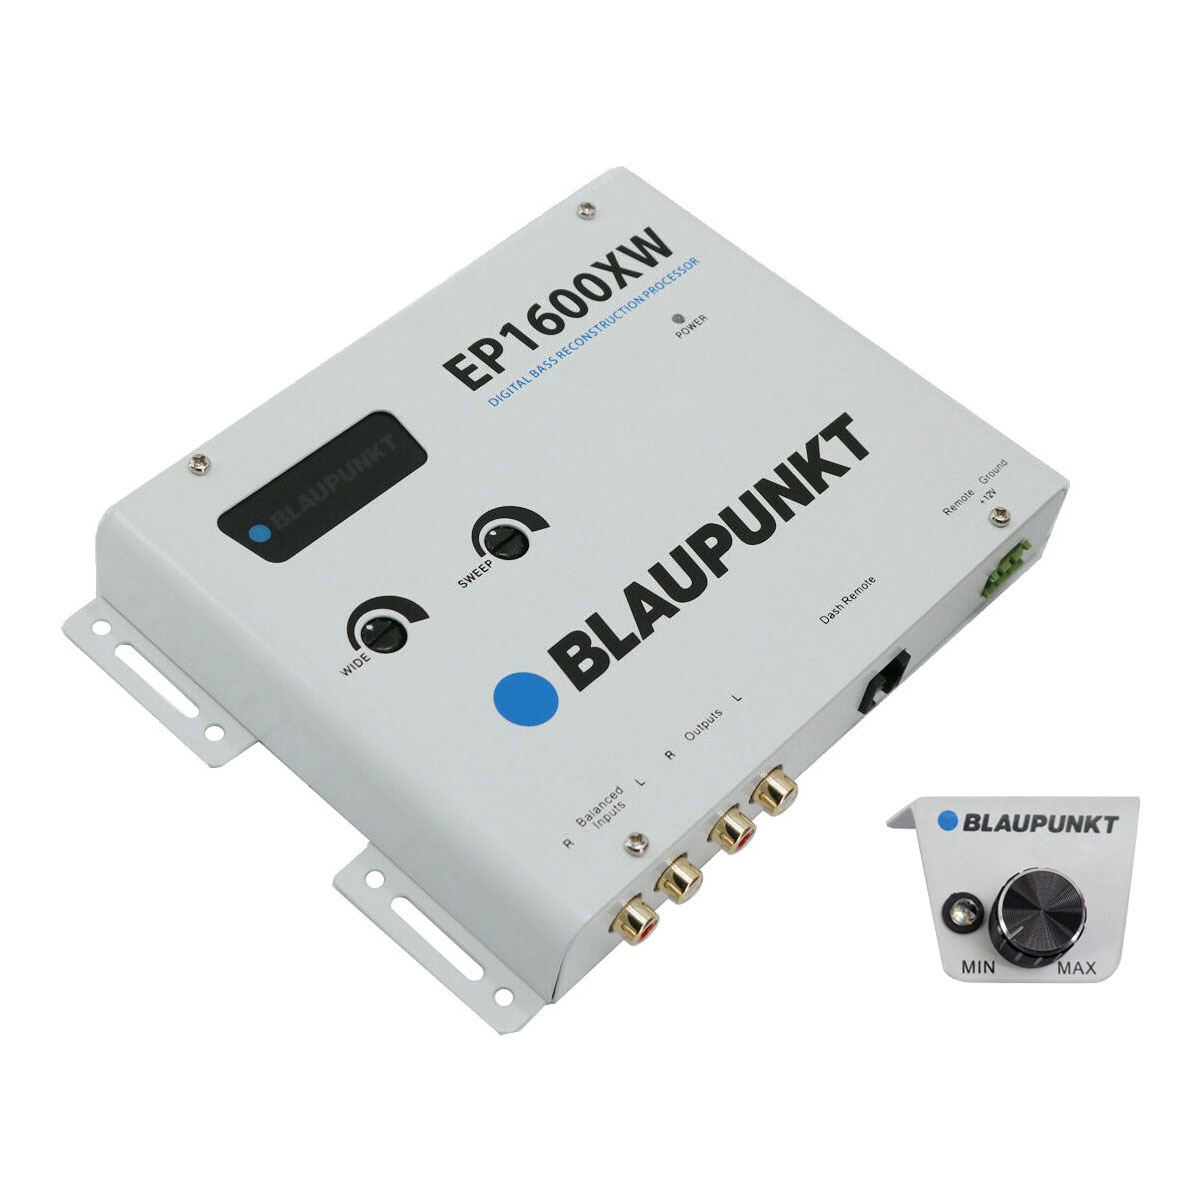 Blaupunkt Digital Bass Reconstruction Processor with Wired Remote Control - White